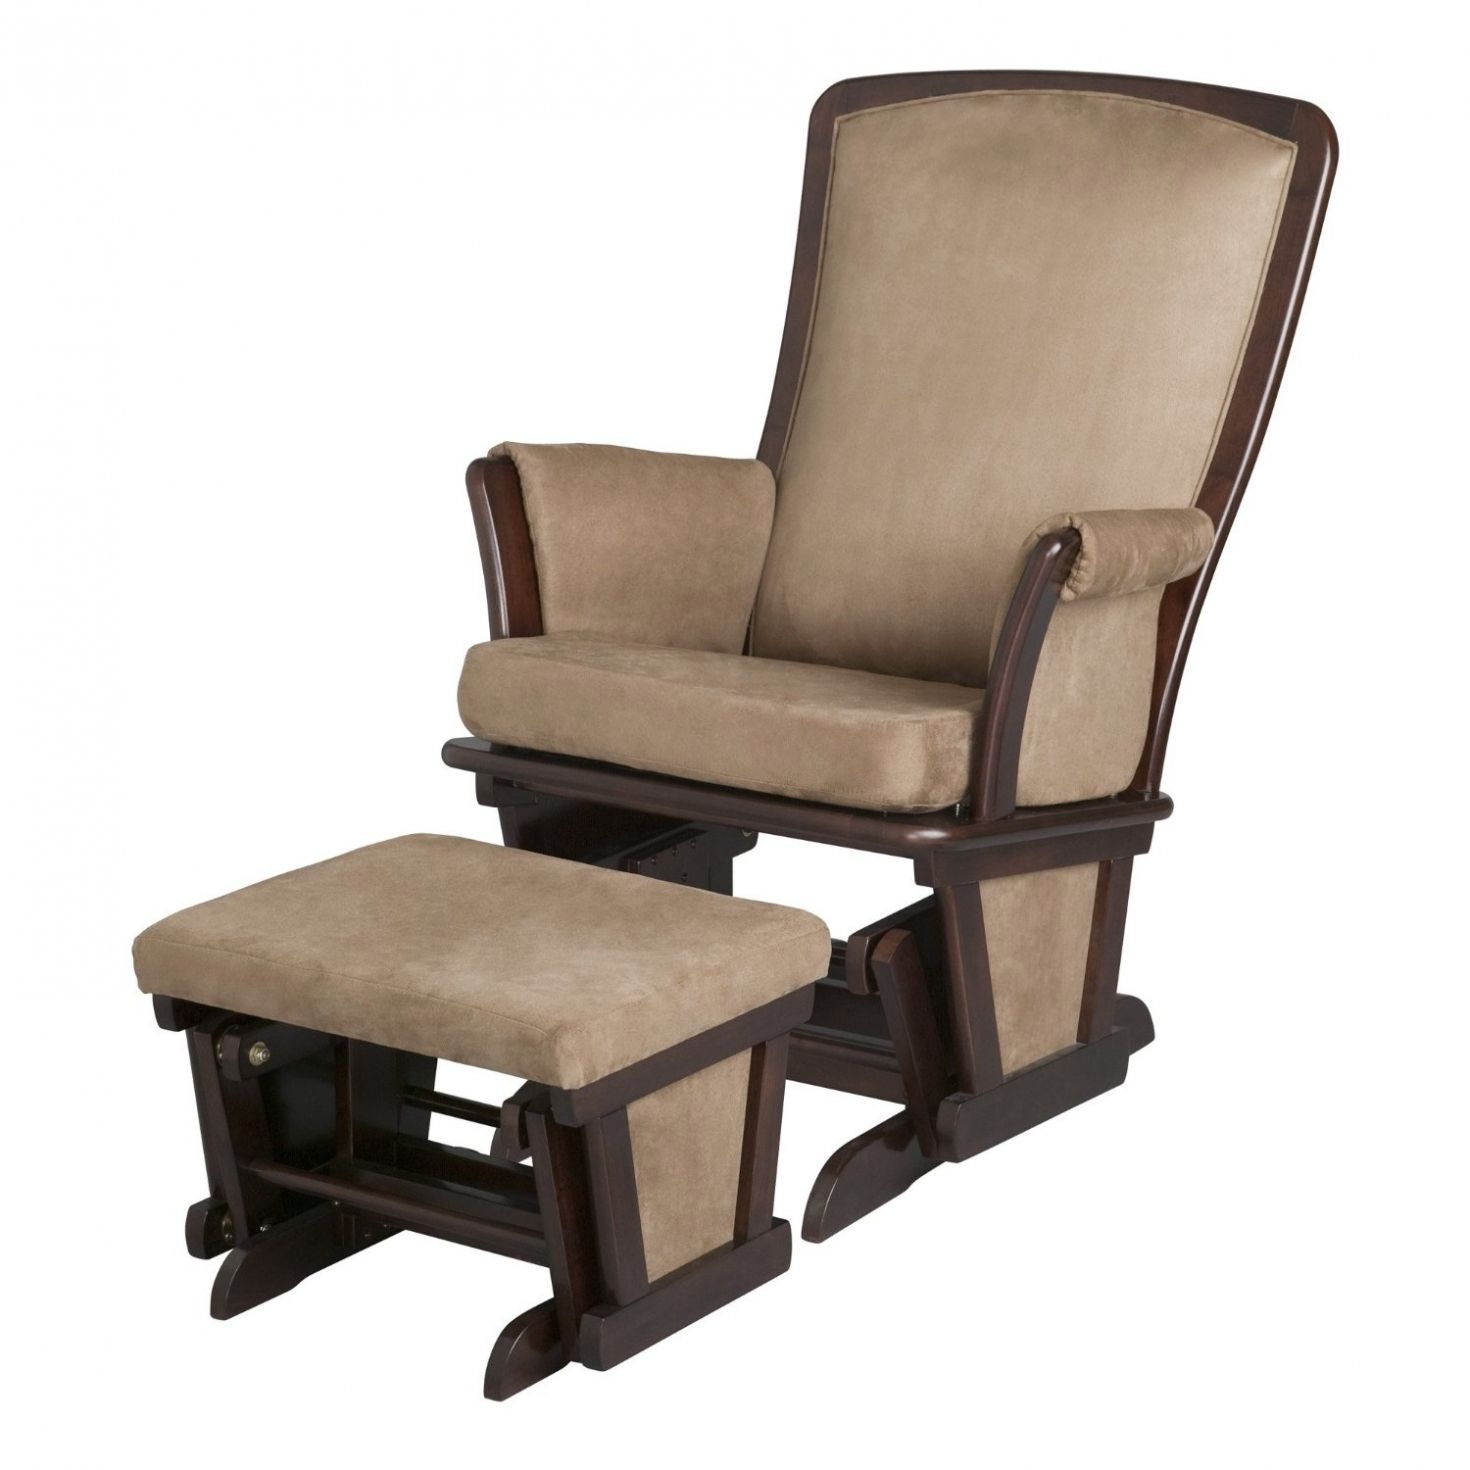 Furniture: Rocking Chairs At Target | Furniture On Applications Intended For Rocking Chairs At Target (Photo 1 of 15)